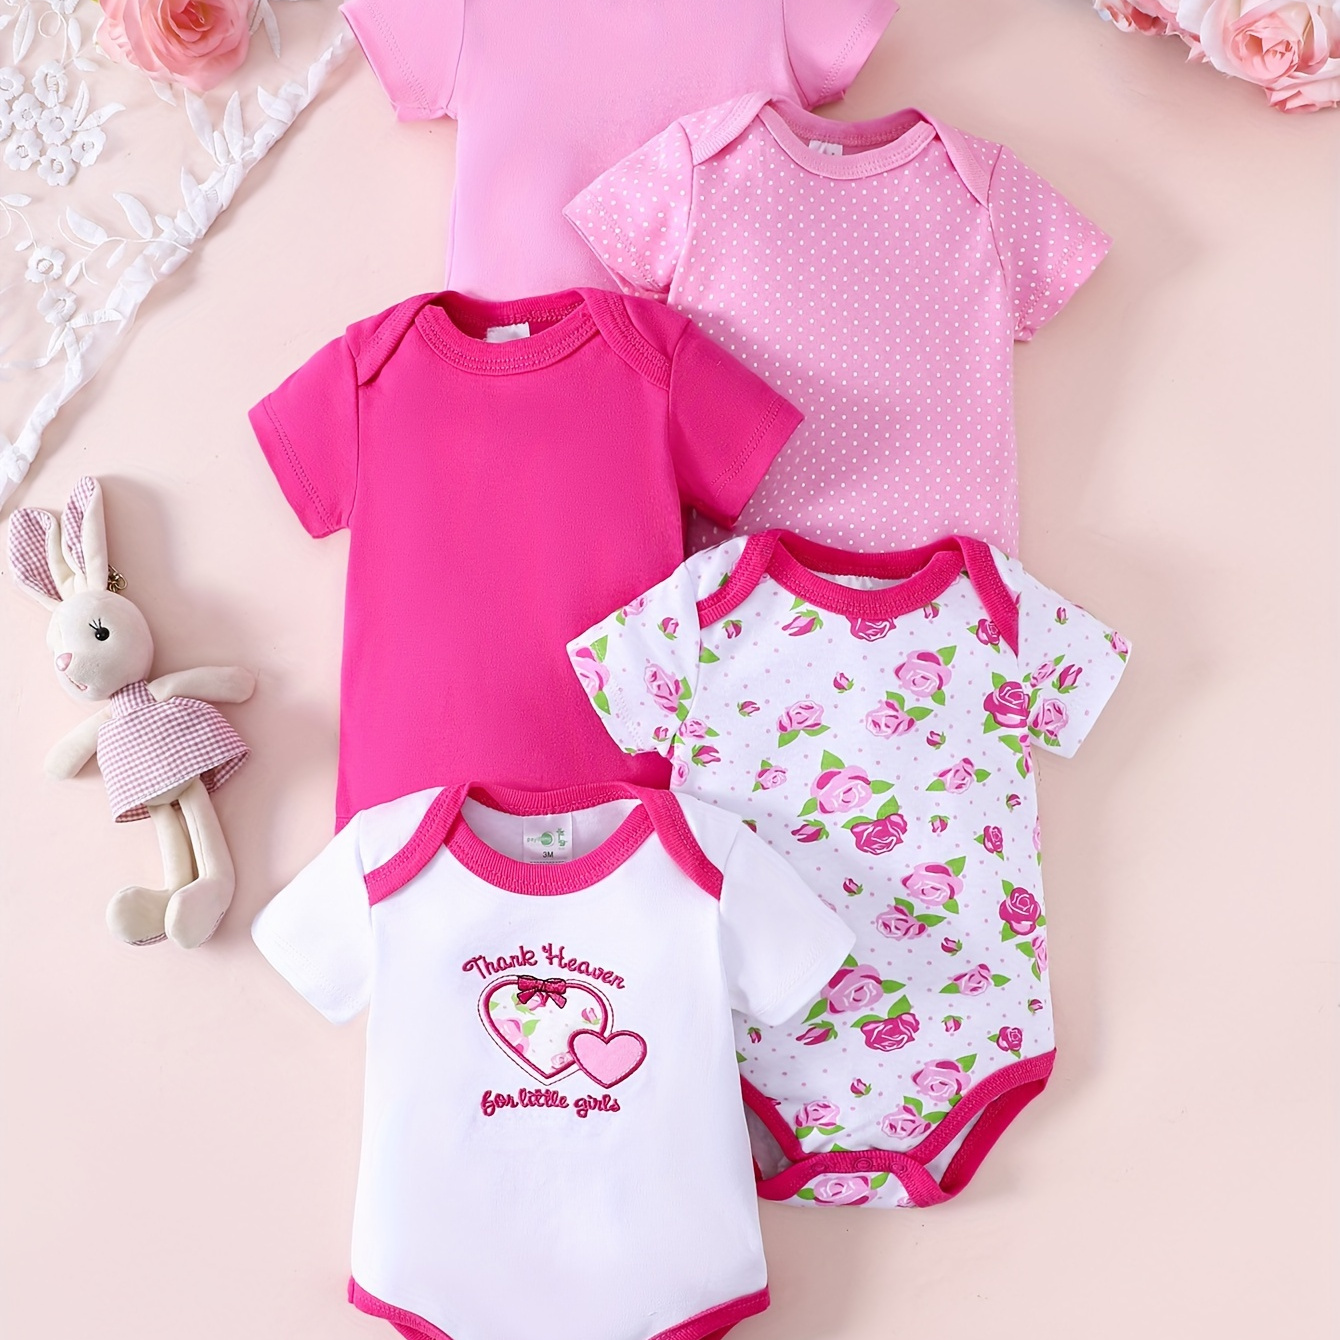 

5pcs Adorable Baby Girl Climbing Clothes Set With Multiple Color Combinations, Cute Flower Print And Heart Patterns Clothing